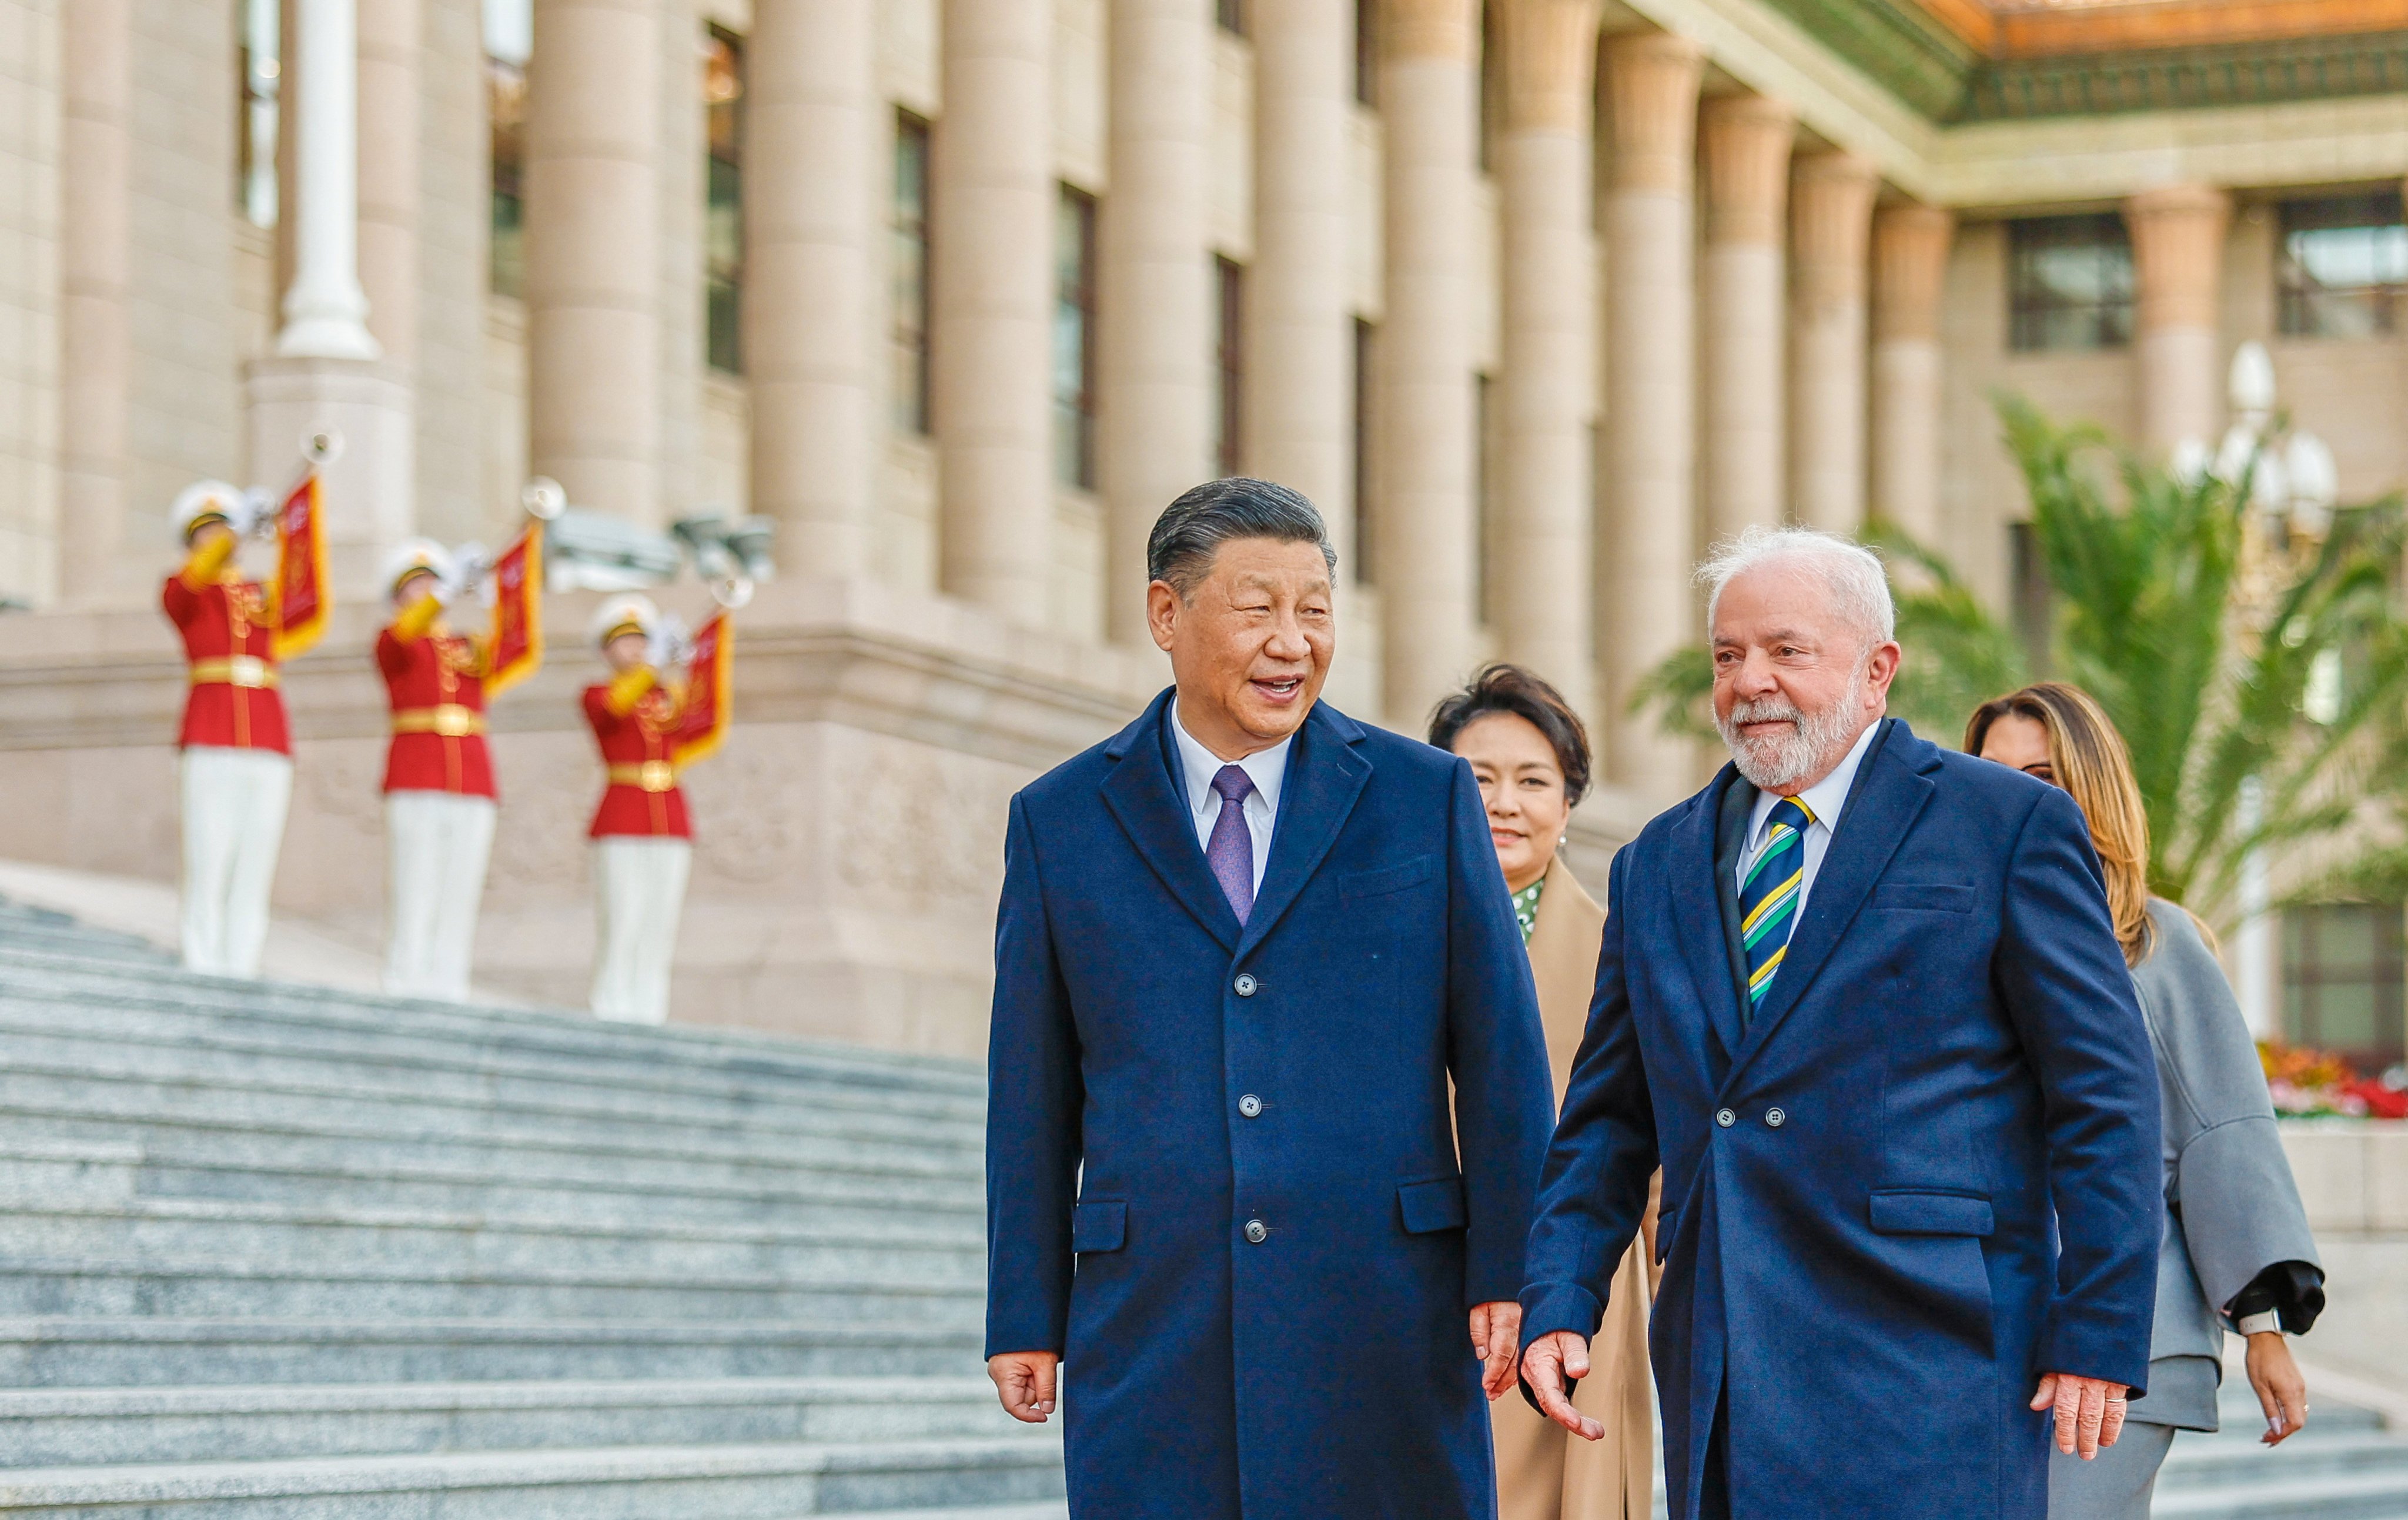 Brazilian President Lula da Silva (right) and President Xi Jinping attend a welcoming ceremony at the Great Hall of the People in Beijing on April 14. Photo: Reuters